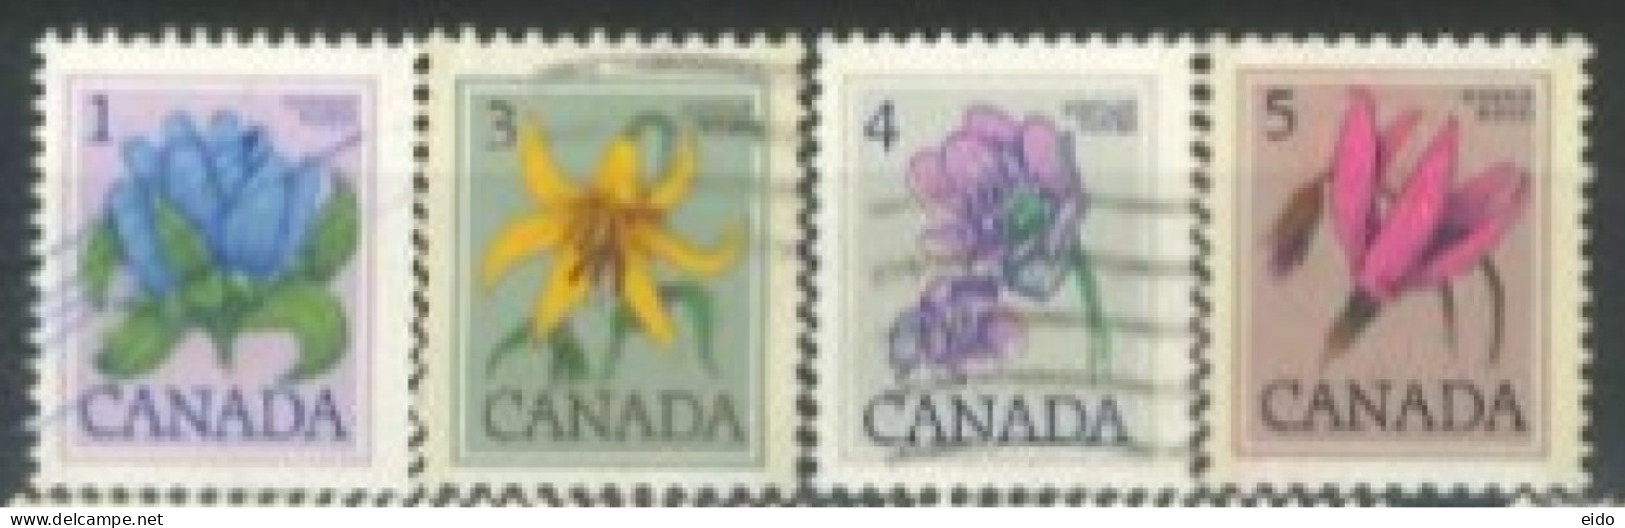 CANADA - 1977, FLOWERS STAMPS SET OF 4, USED. - Usati